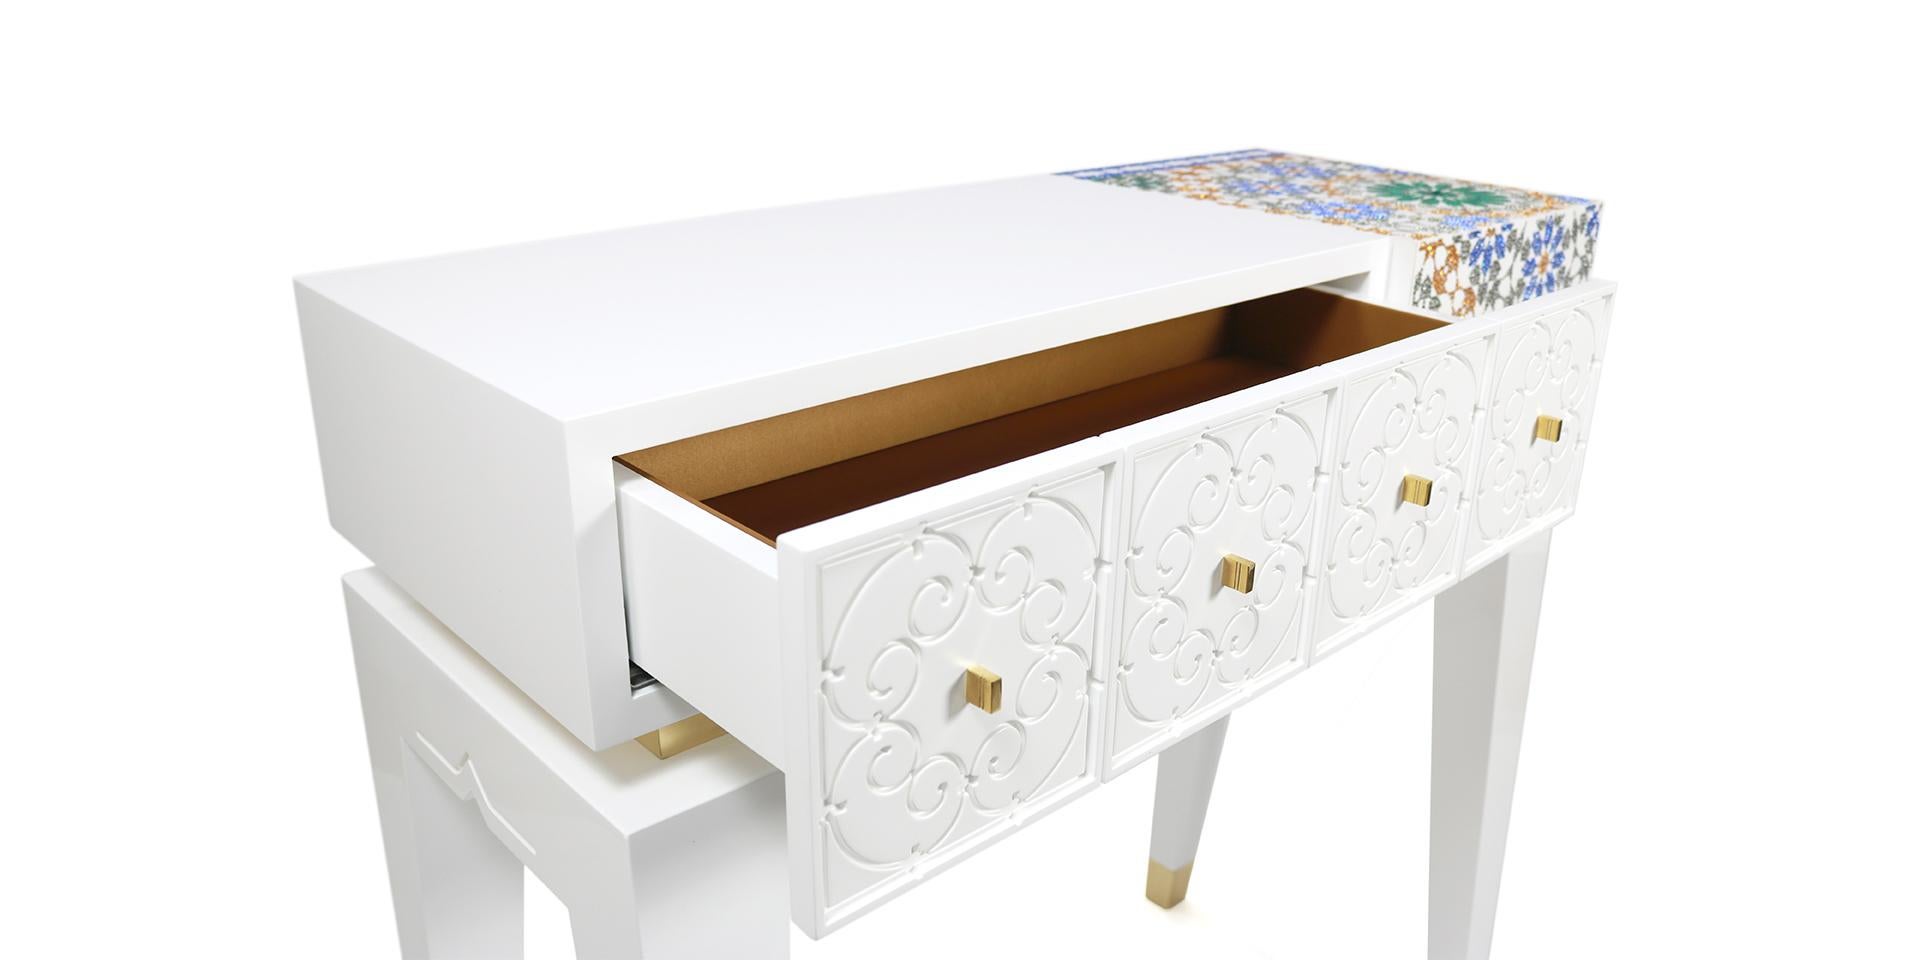 El Ba'ia console reflets the colours of architecture of the Marocan Palaces. The zellige art and its pattern is well represented in the counter through the swarovski crystals. Designers used, historically, zellige to decorate wonderful homes as a